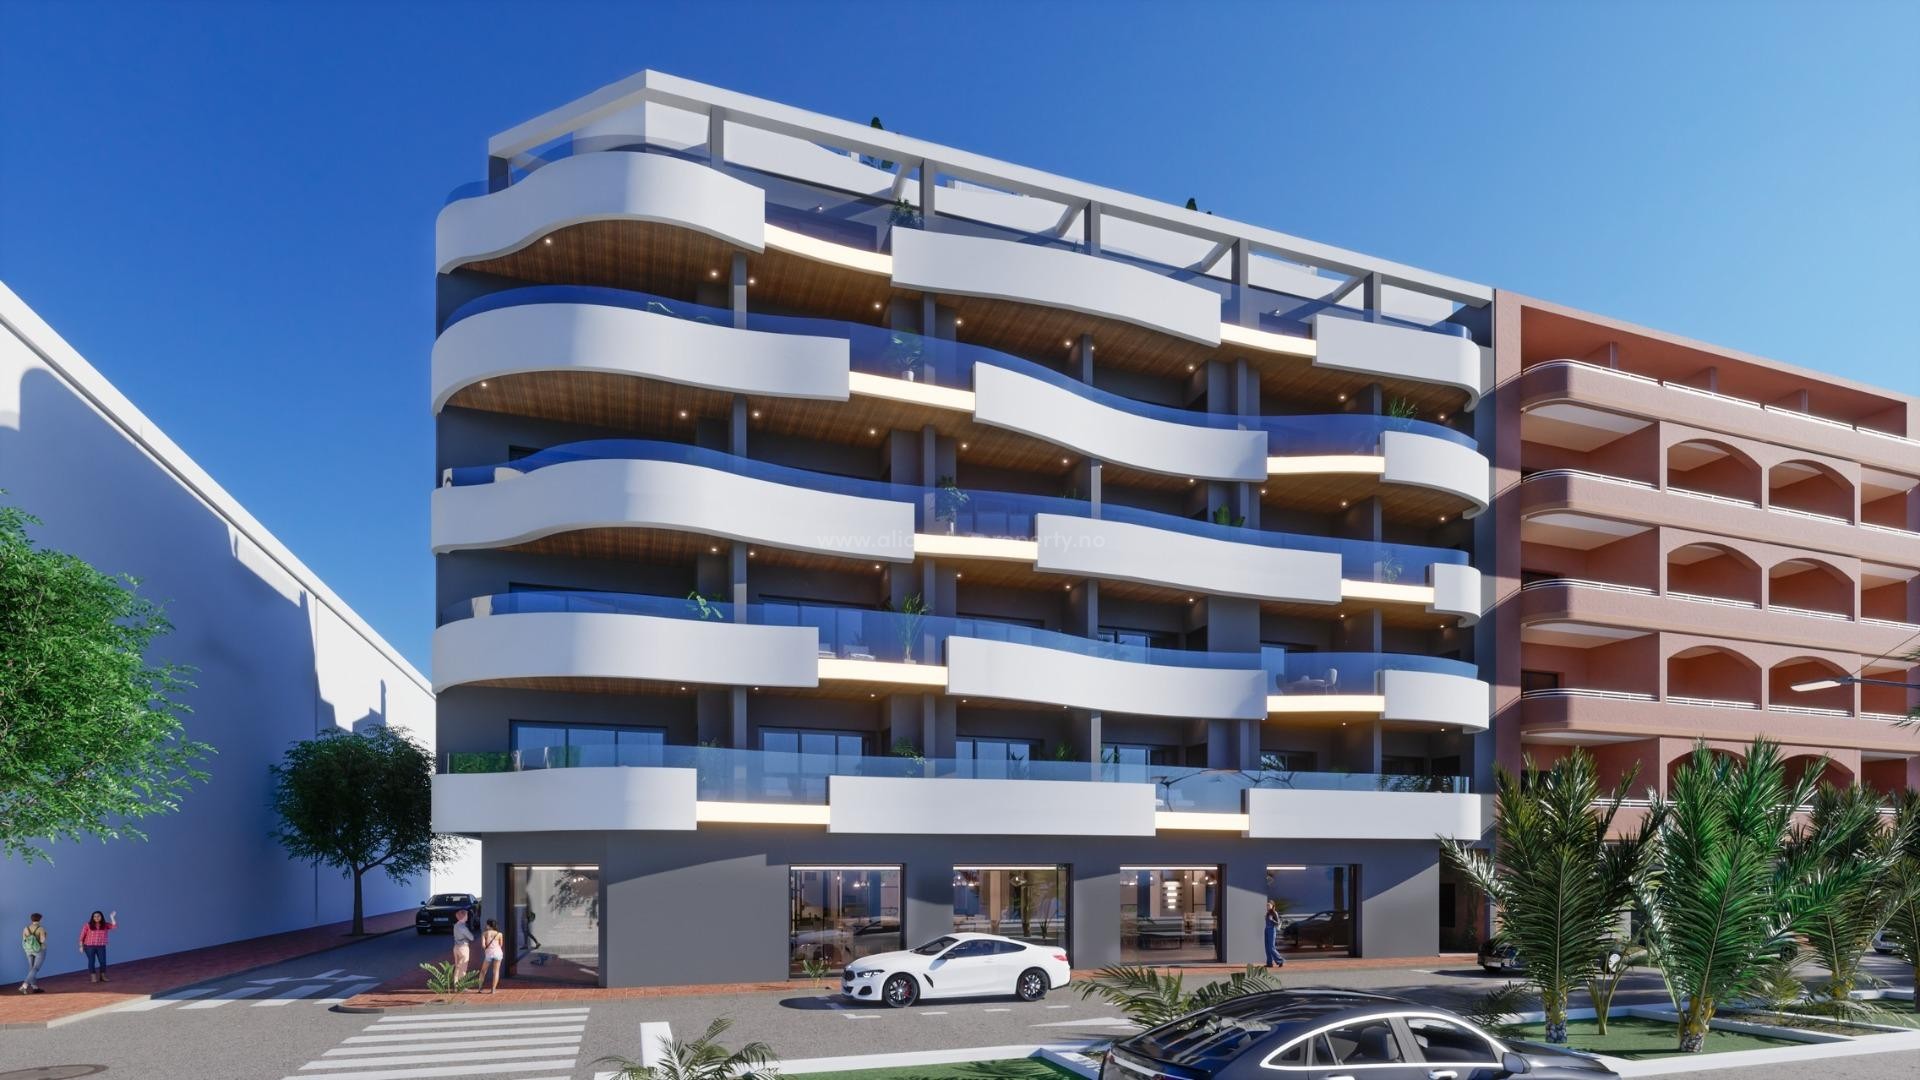 Exclusive apartments and penthouses in Torrevieja with avant-garde design, 2/3 bedrooms, 2 bathrooms. Residential located in the heart of Torrevieja